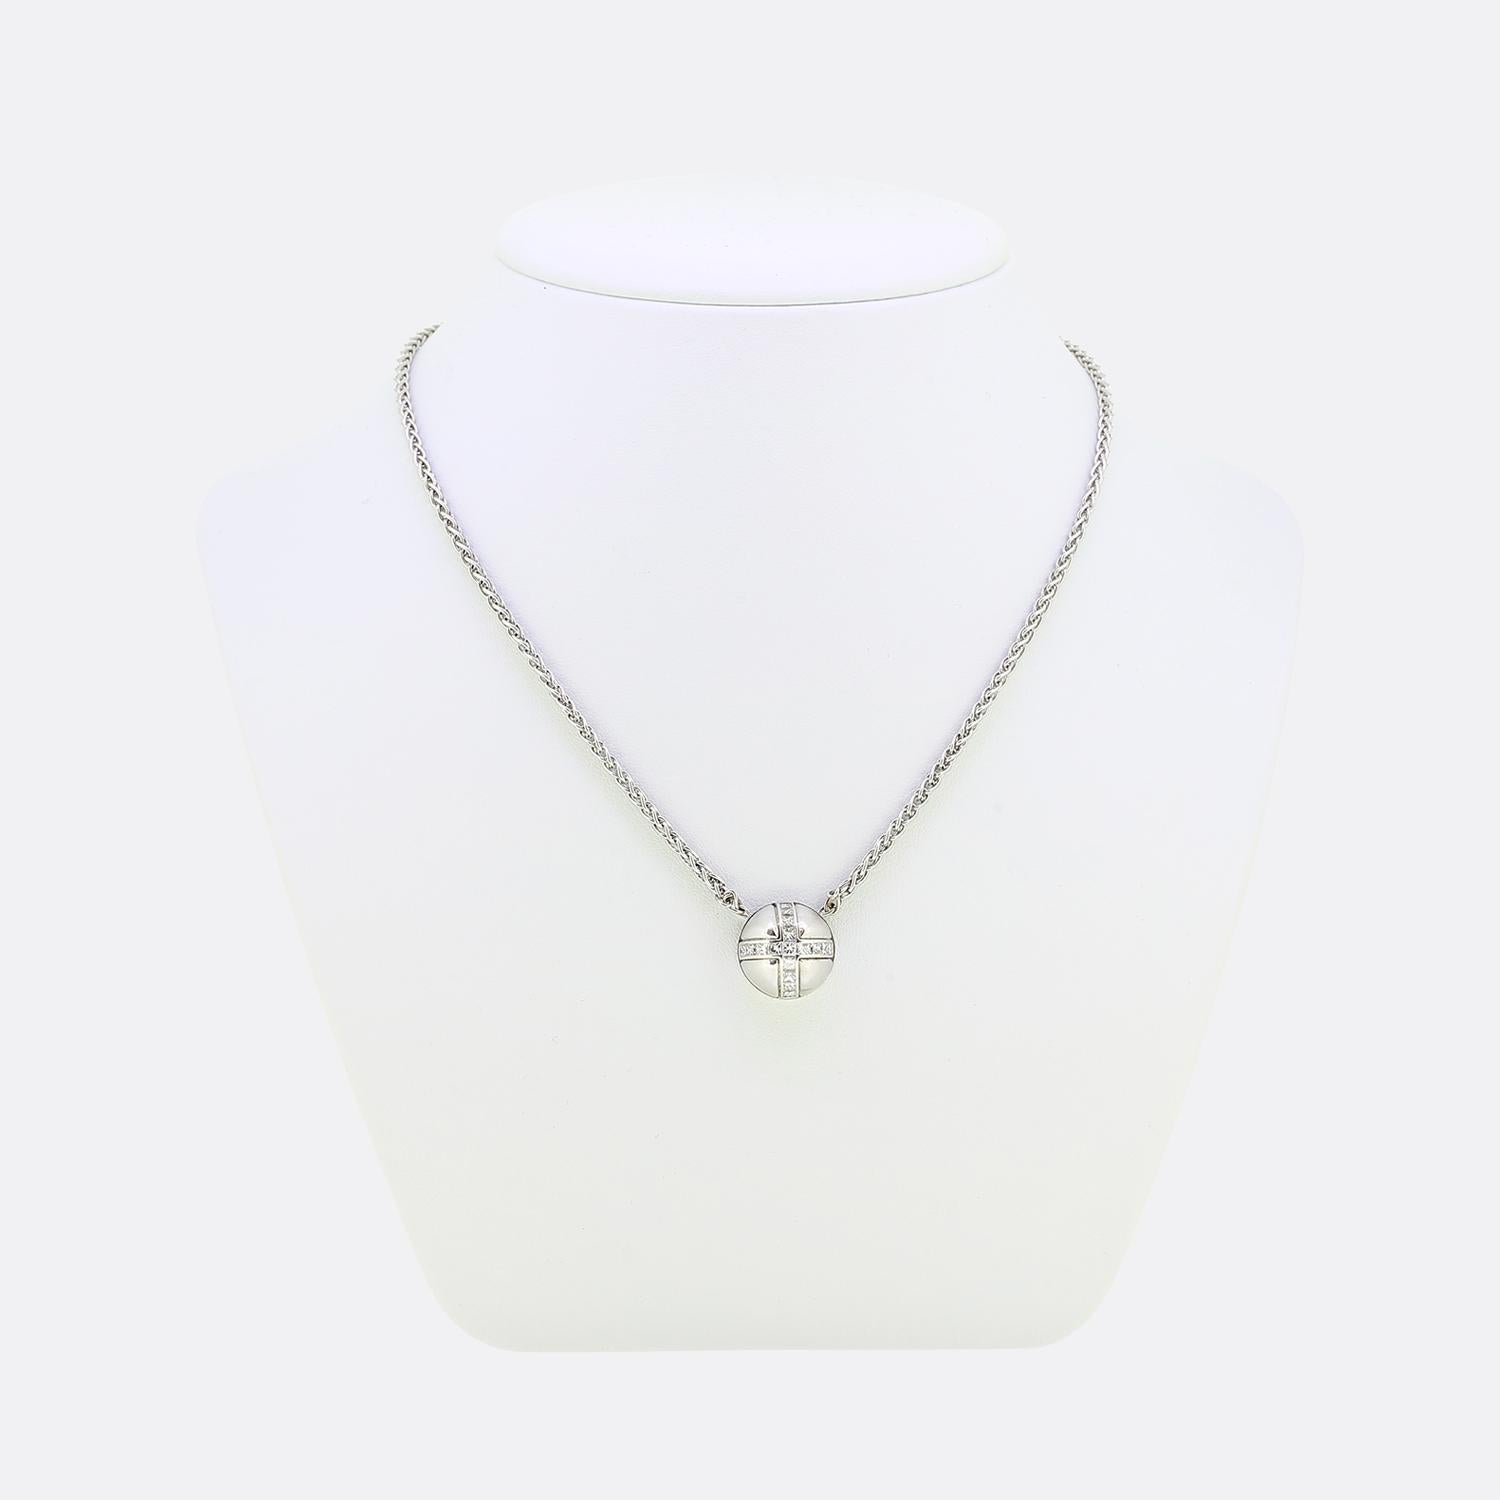 This is an 18ct white gold pendant necklace from the designer Garrard. The chain is in a wheat style and features a domed pendant set with 17 princess cut diamonds in a cross shape. Since 1735 Garrard has been creating fine pieces of jewellery